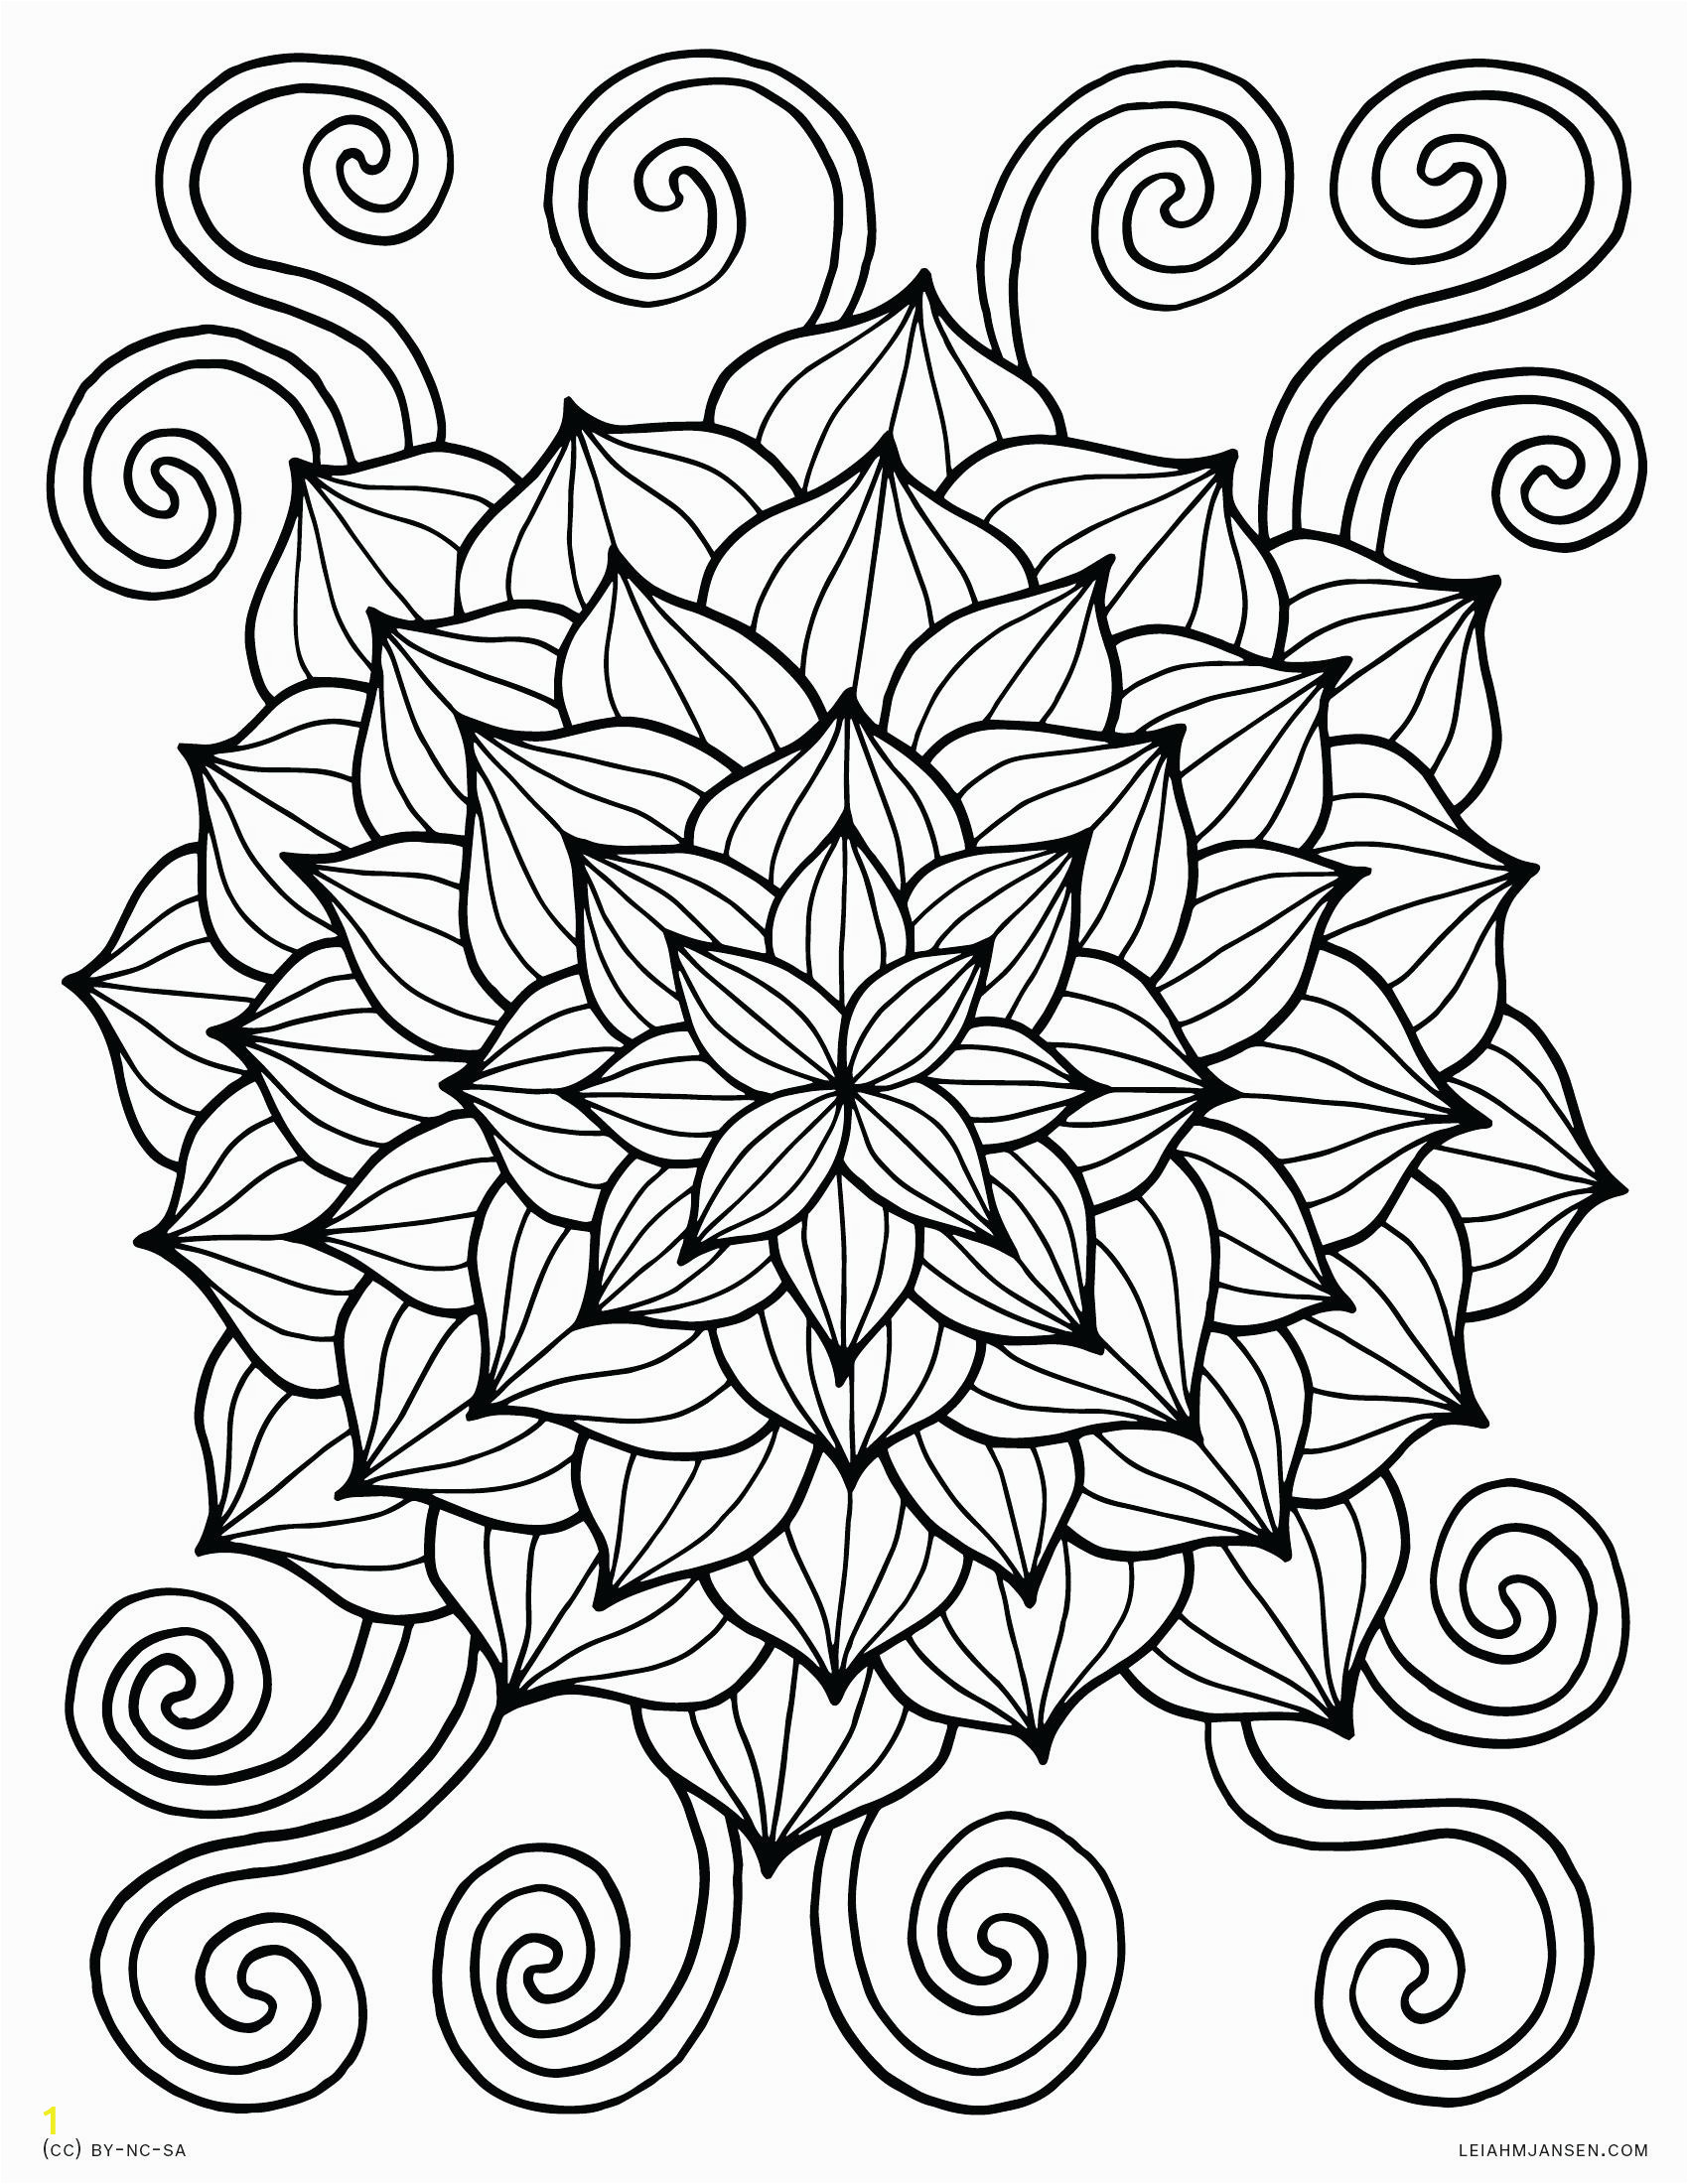 Coloring Pages for Adults Abstract Flowers Abstract Flowers Coloring Pages at Getcolorings